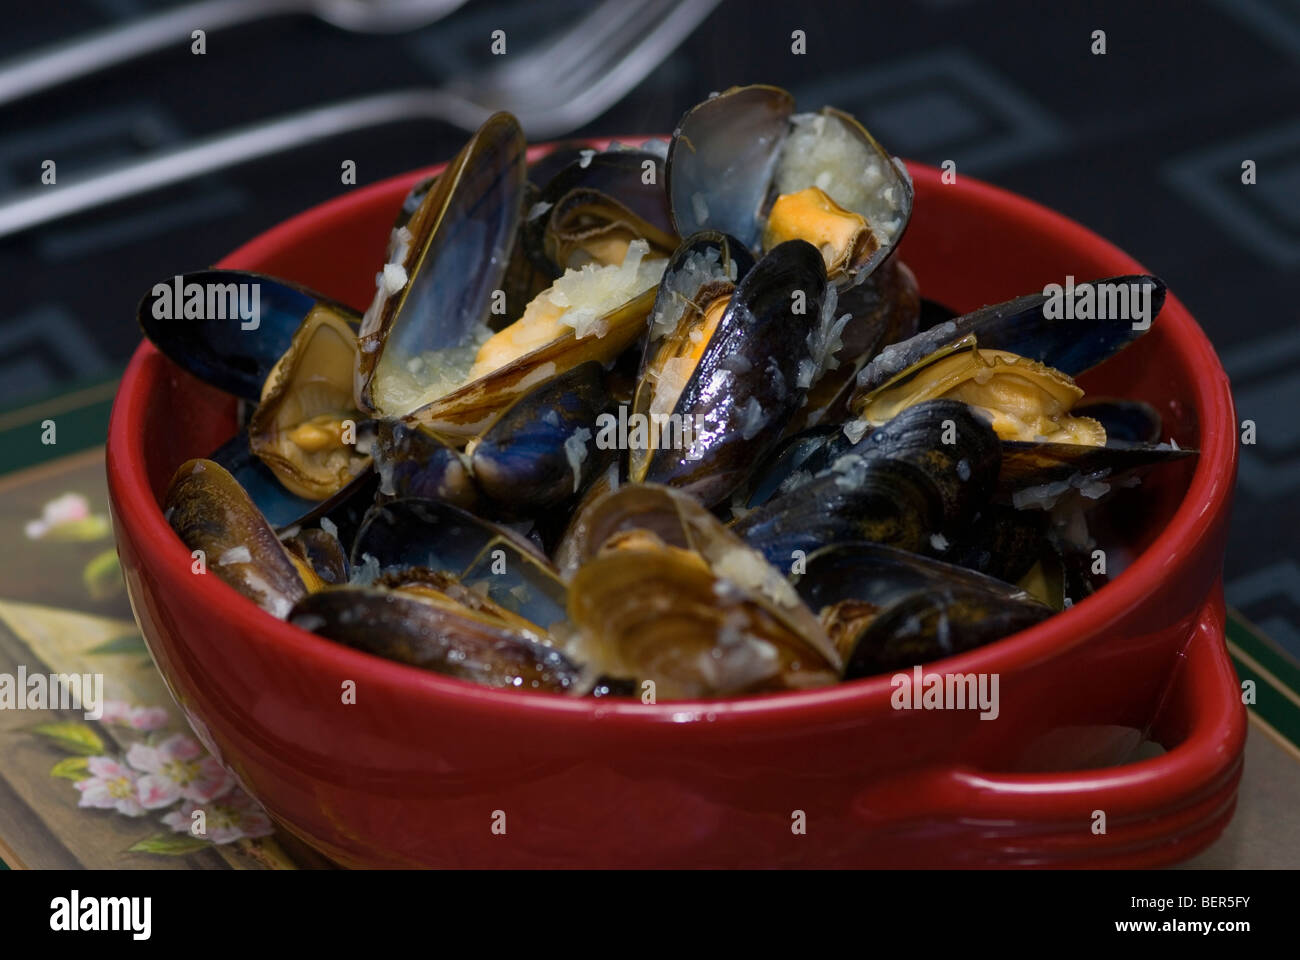 Cooked Mussels in red bowl Stock Photo